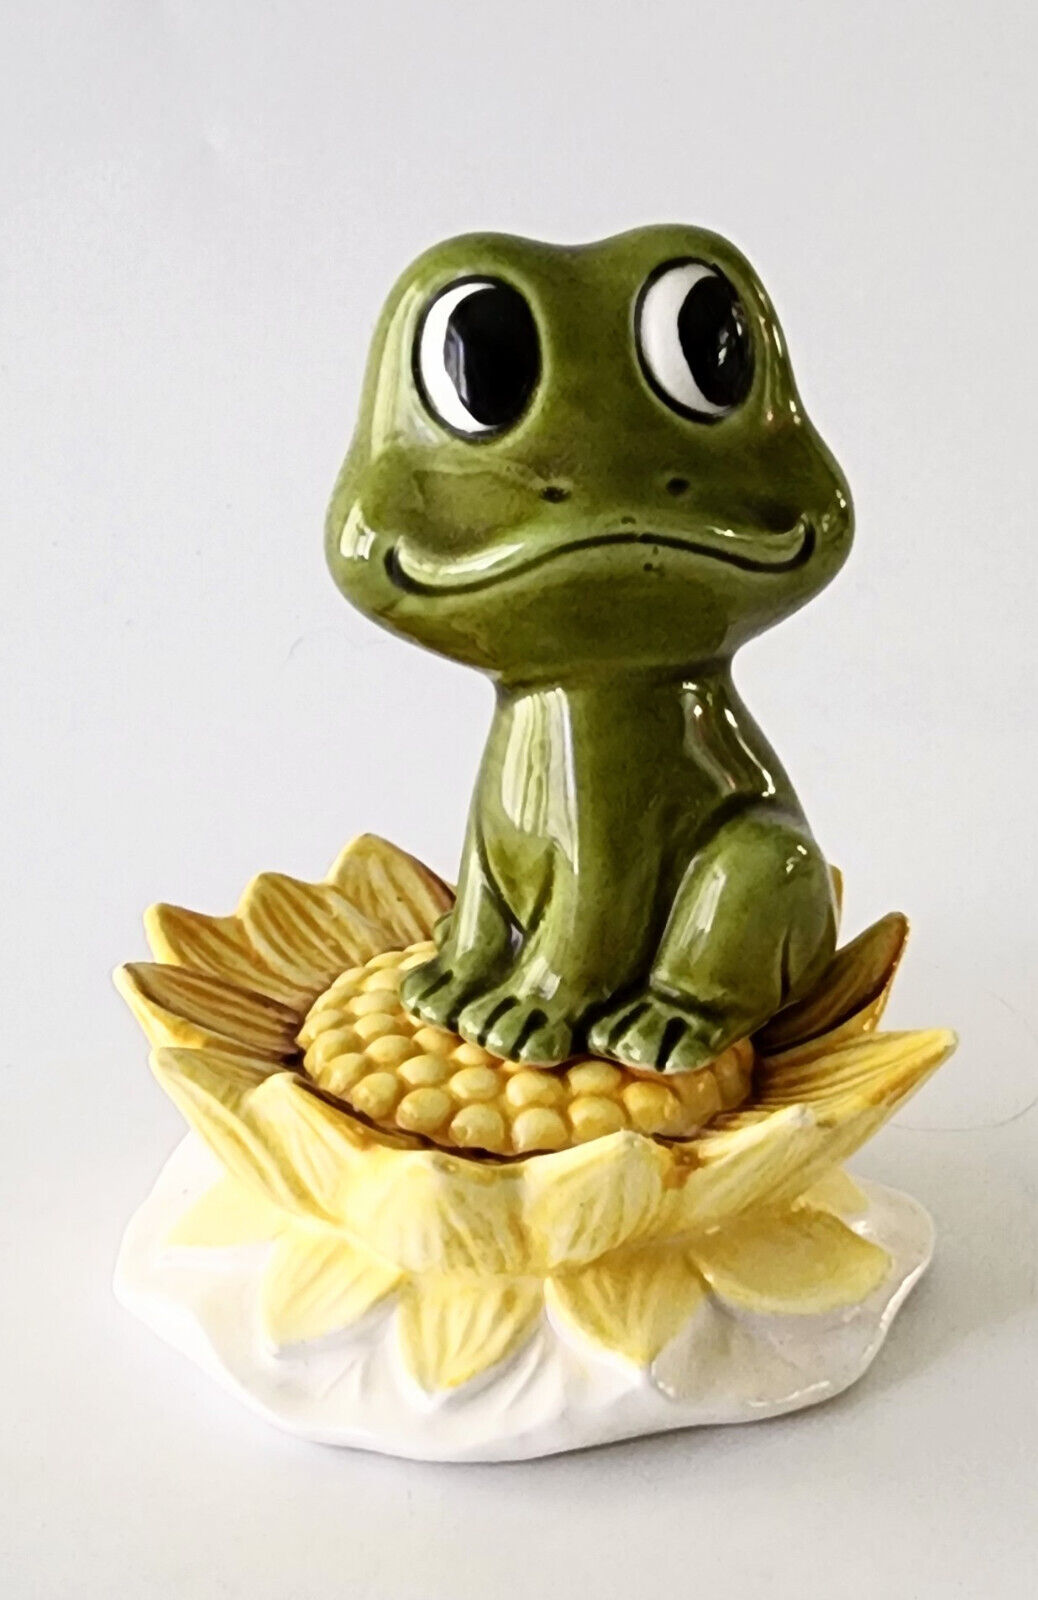 Vintage 70's Neil The Frog & Lily Pad Salt and Pepper Shakers Sears & Roebuck